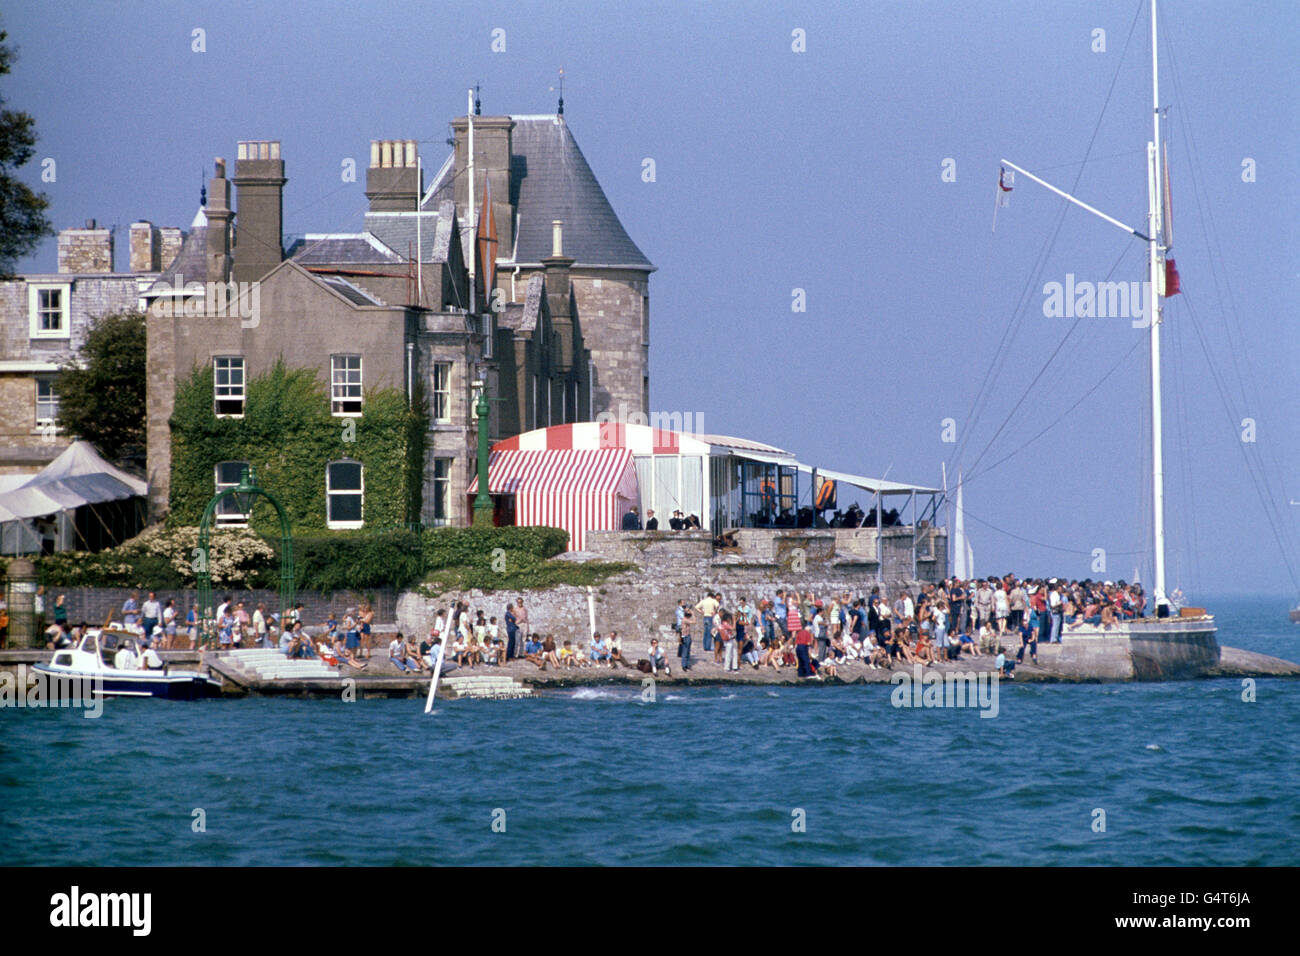 Sailing - Admiral's Cup Yacht Race - Cowes, Isle of Wight. The Royal Yacht Squadron at Cowes, Isle of Wight, during the 1975 Admiral's Cup Yacht Race Stock Photo